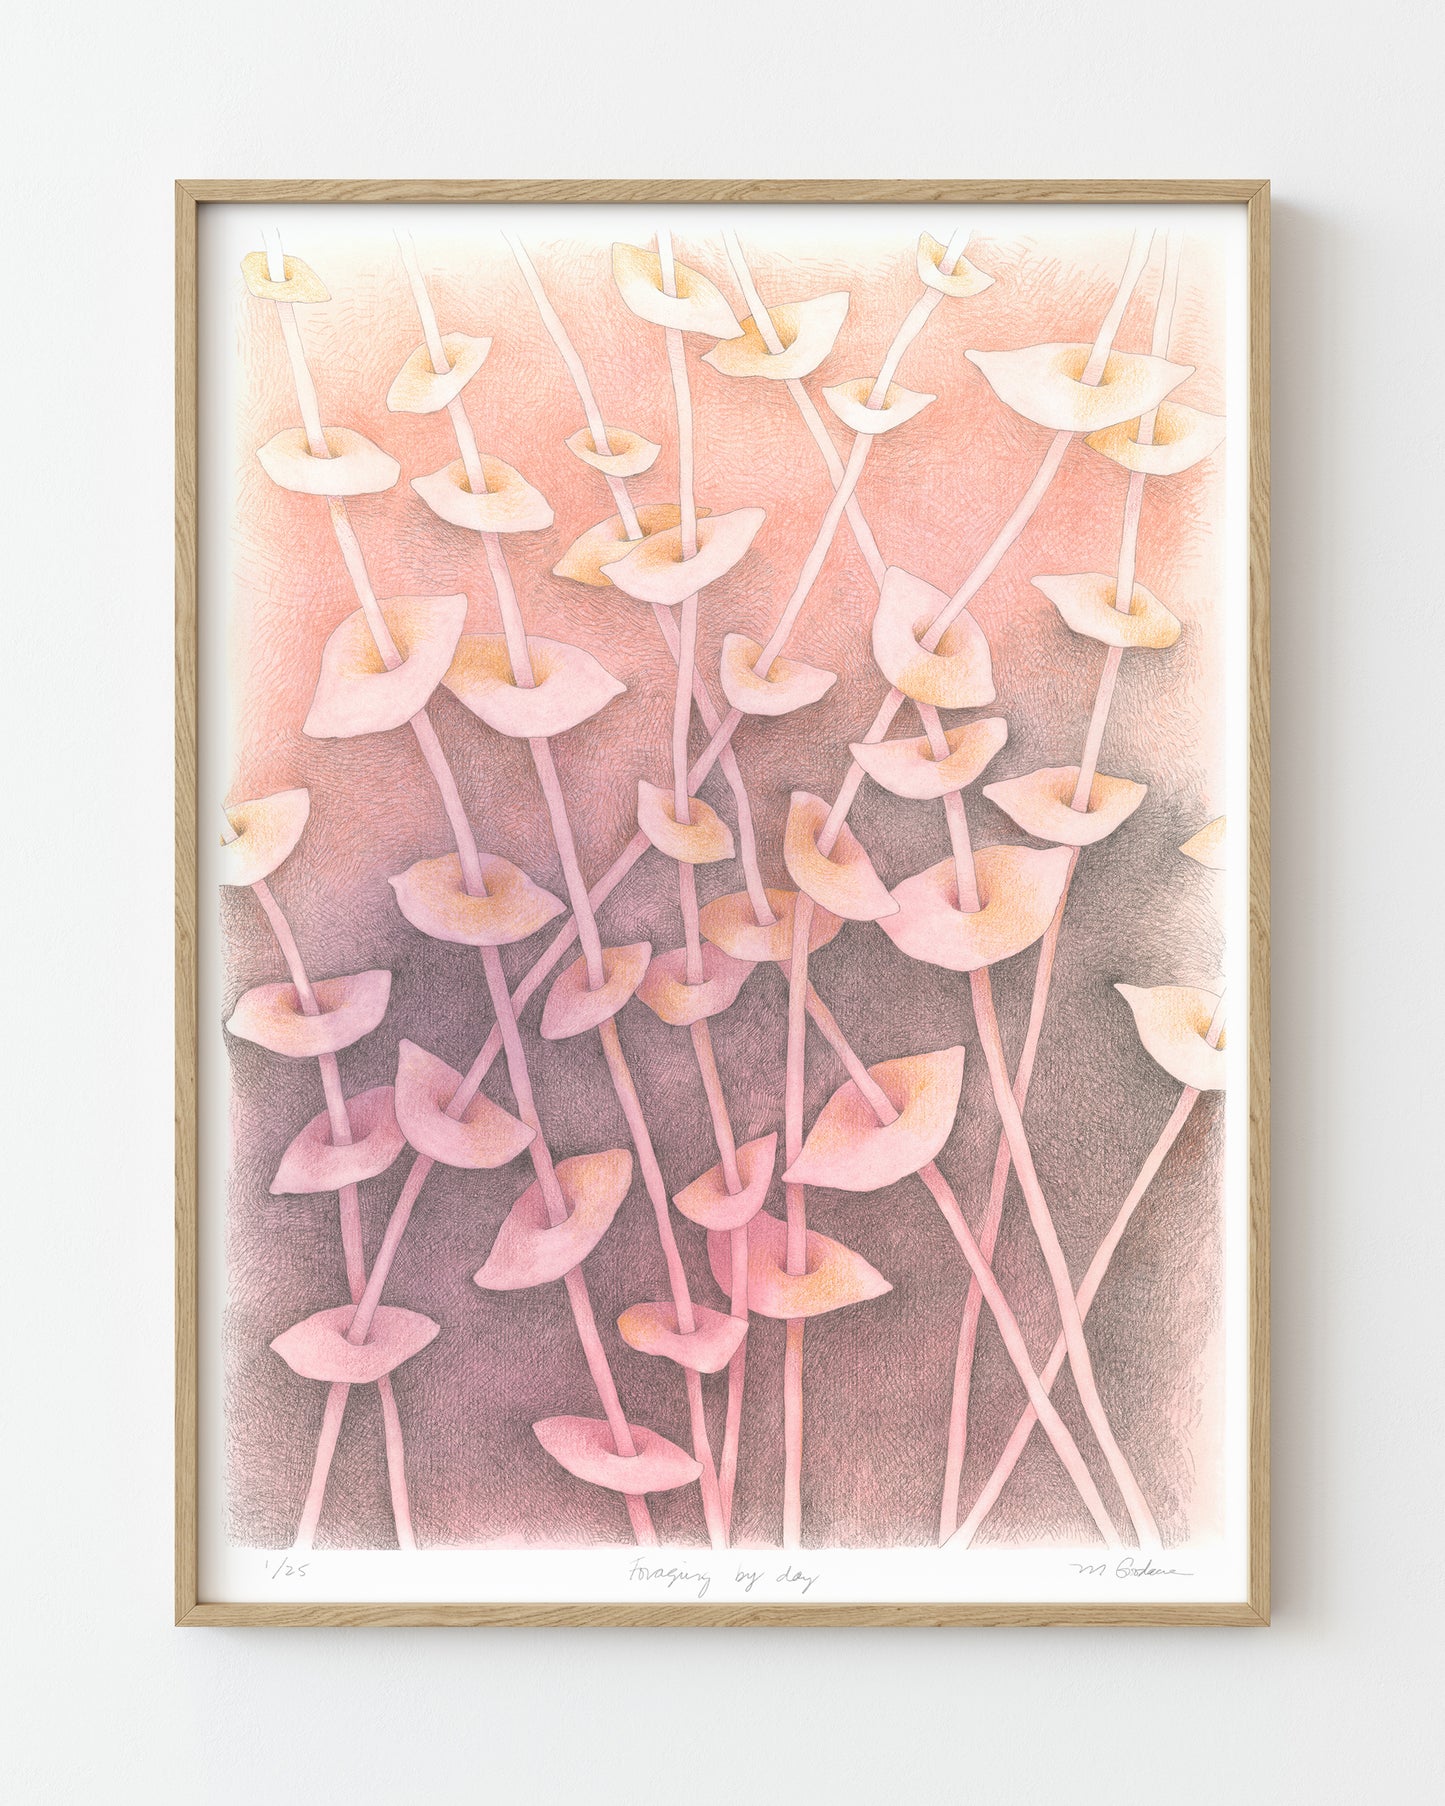 Semi-abstract colored pencil drawing of overlapping leaves on slender stems on peach background.